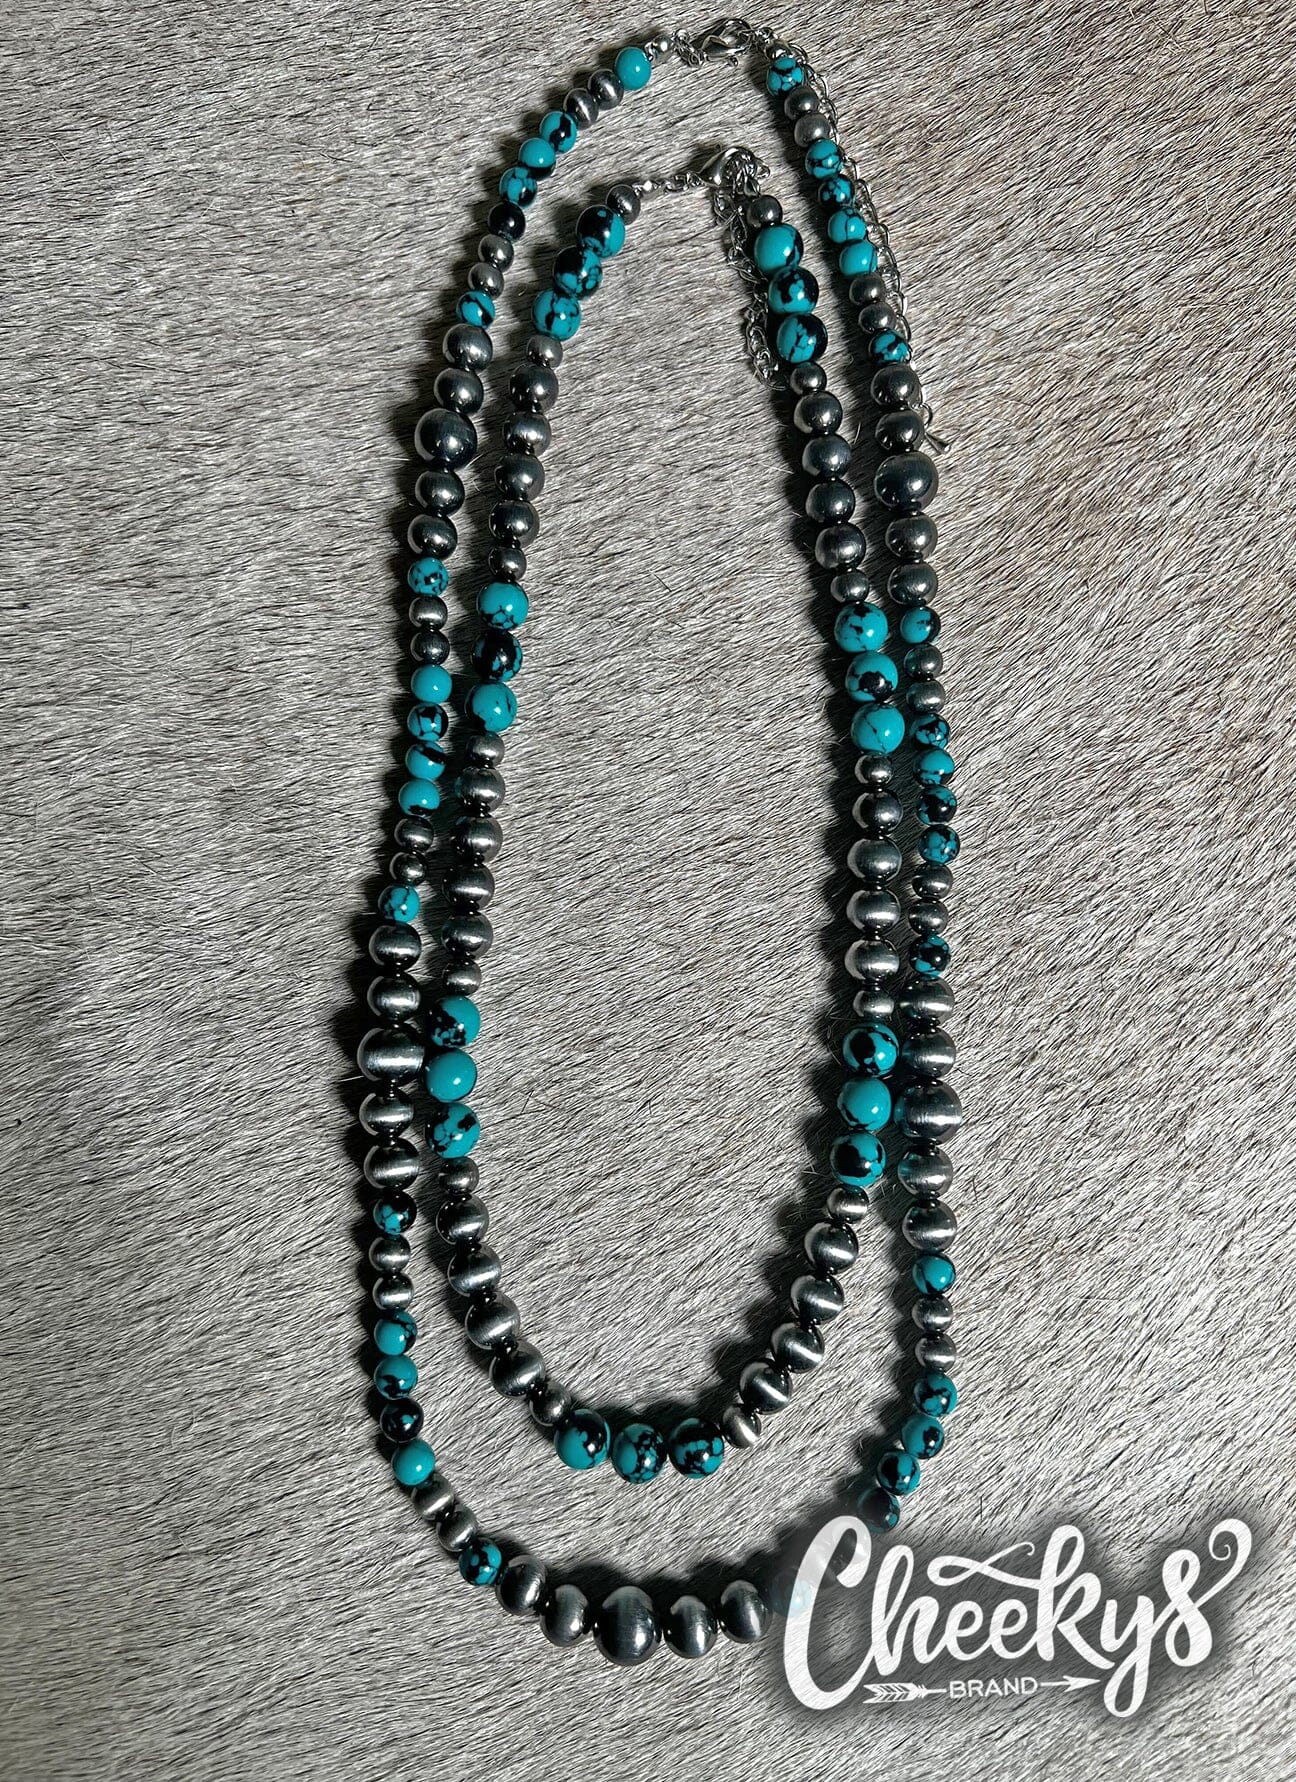 Teal/Blk Navajo Pearl 2pc Necklace Cheekys Brand 